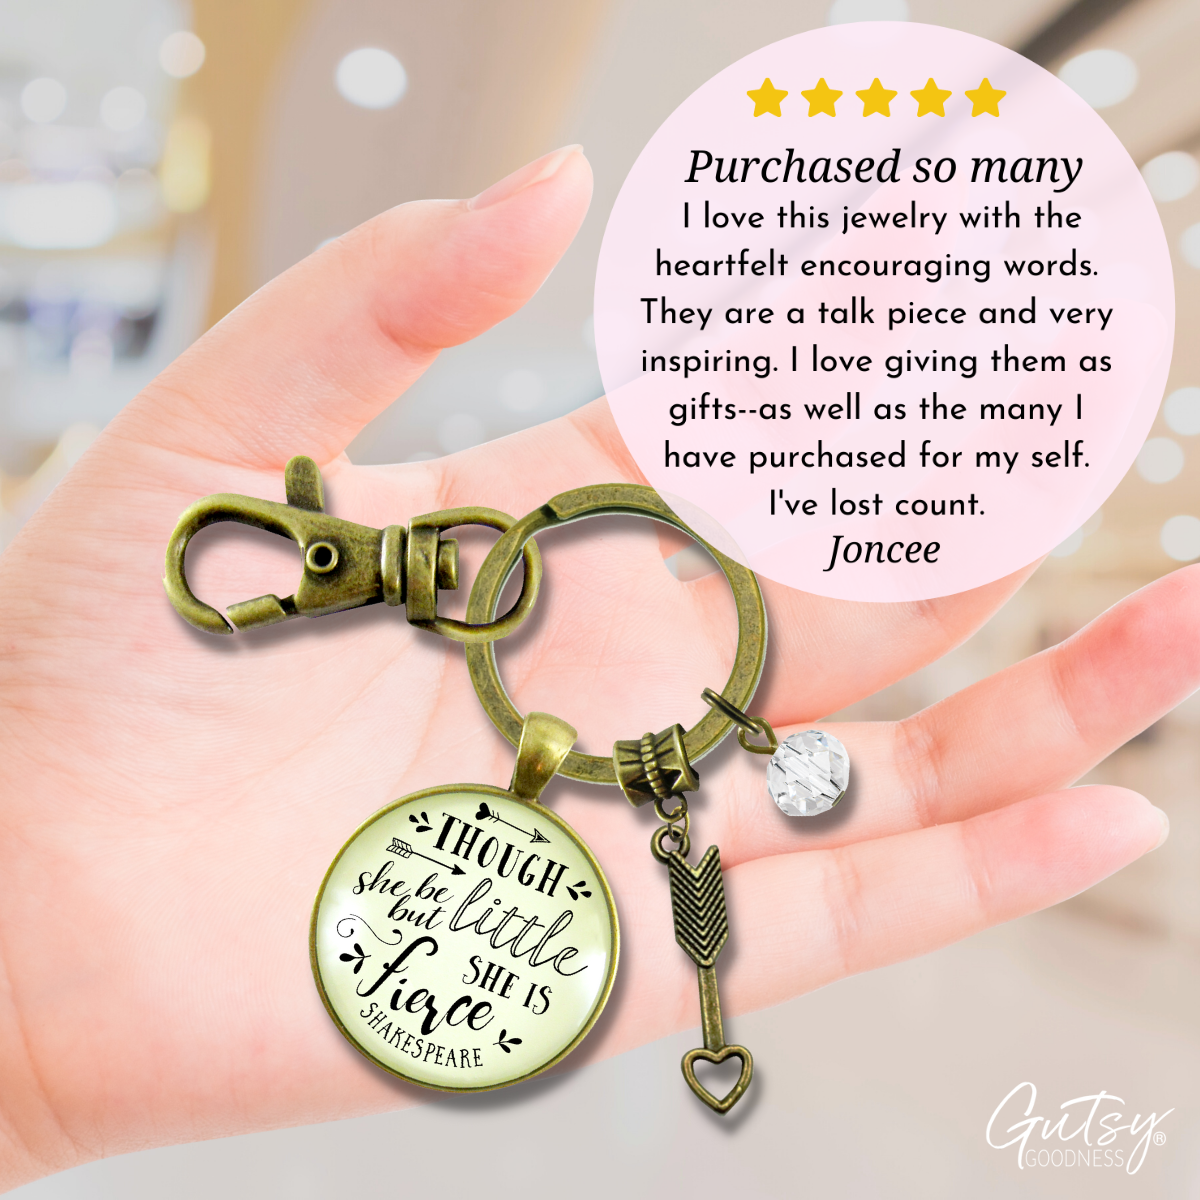 Though She Be But Little Fierce Keychain Shakespeare Inspired Jewelry Quote For Women Teen - Gutsy Goodness Handmade Jewelry;Though She Be But Little Fierce Keychain Shakespeare Inspired Jewelry Quote For Women Teen - Gutsy Goodness Handmade Jewelry Gifts